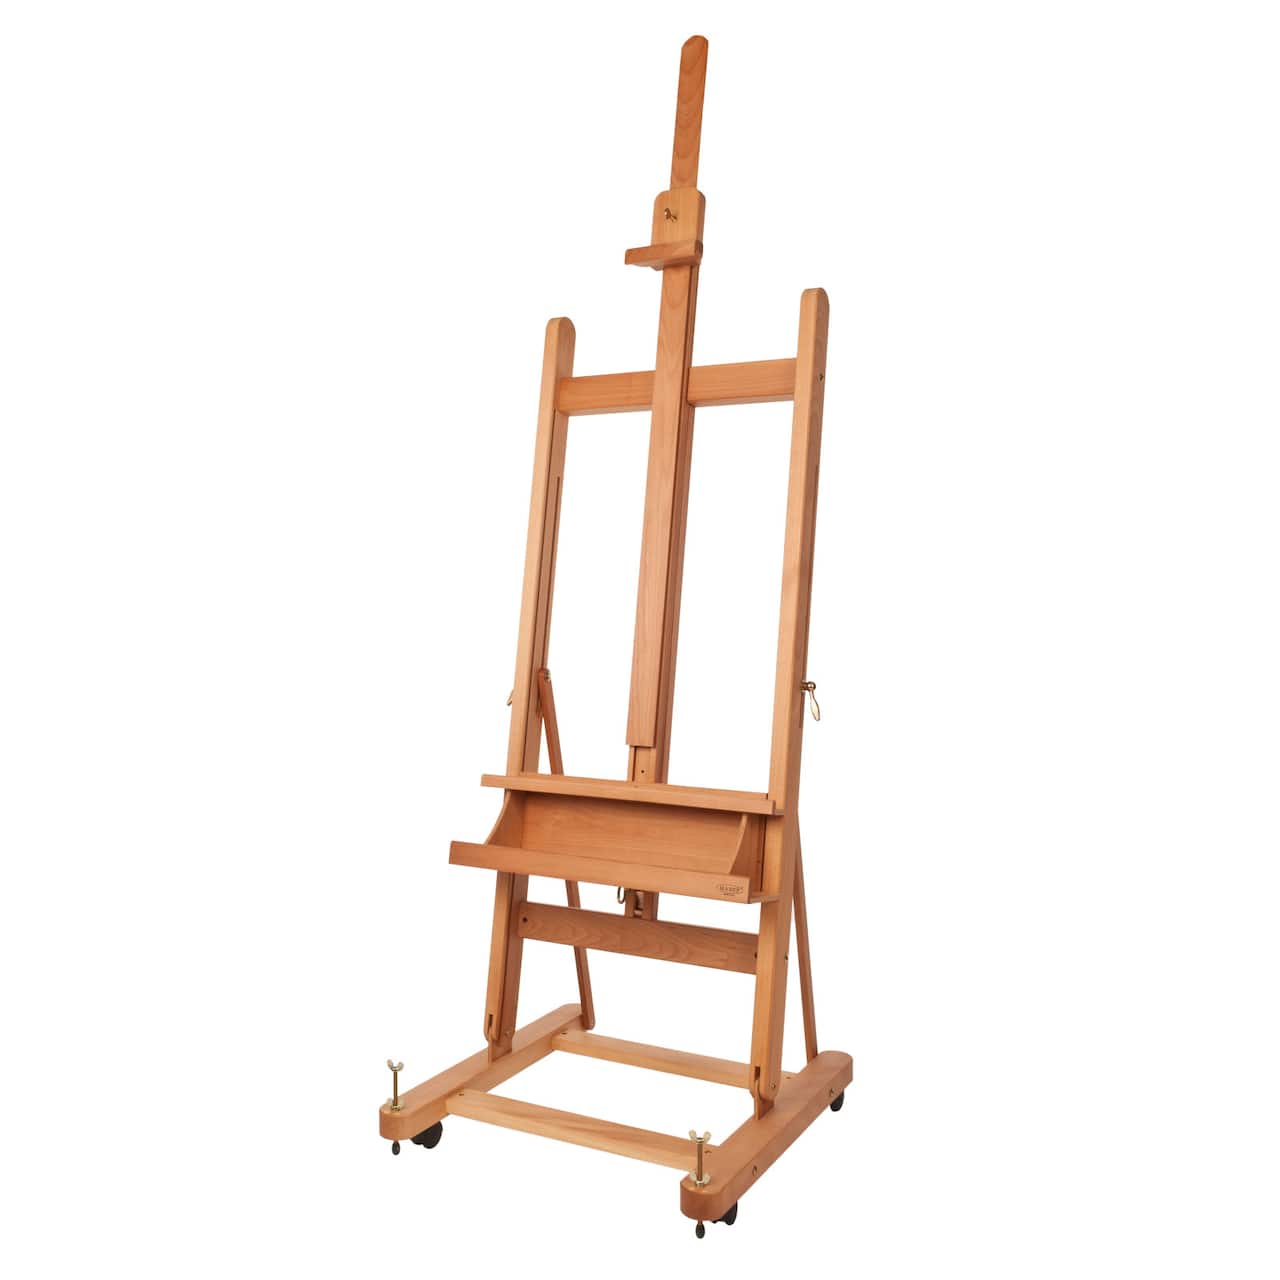 Mabef Deluxe Studio Easel